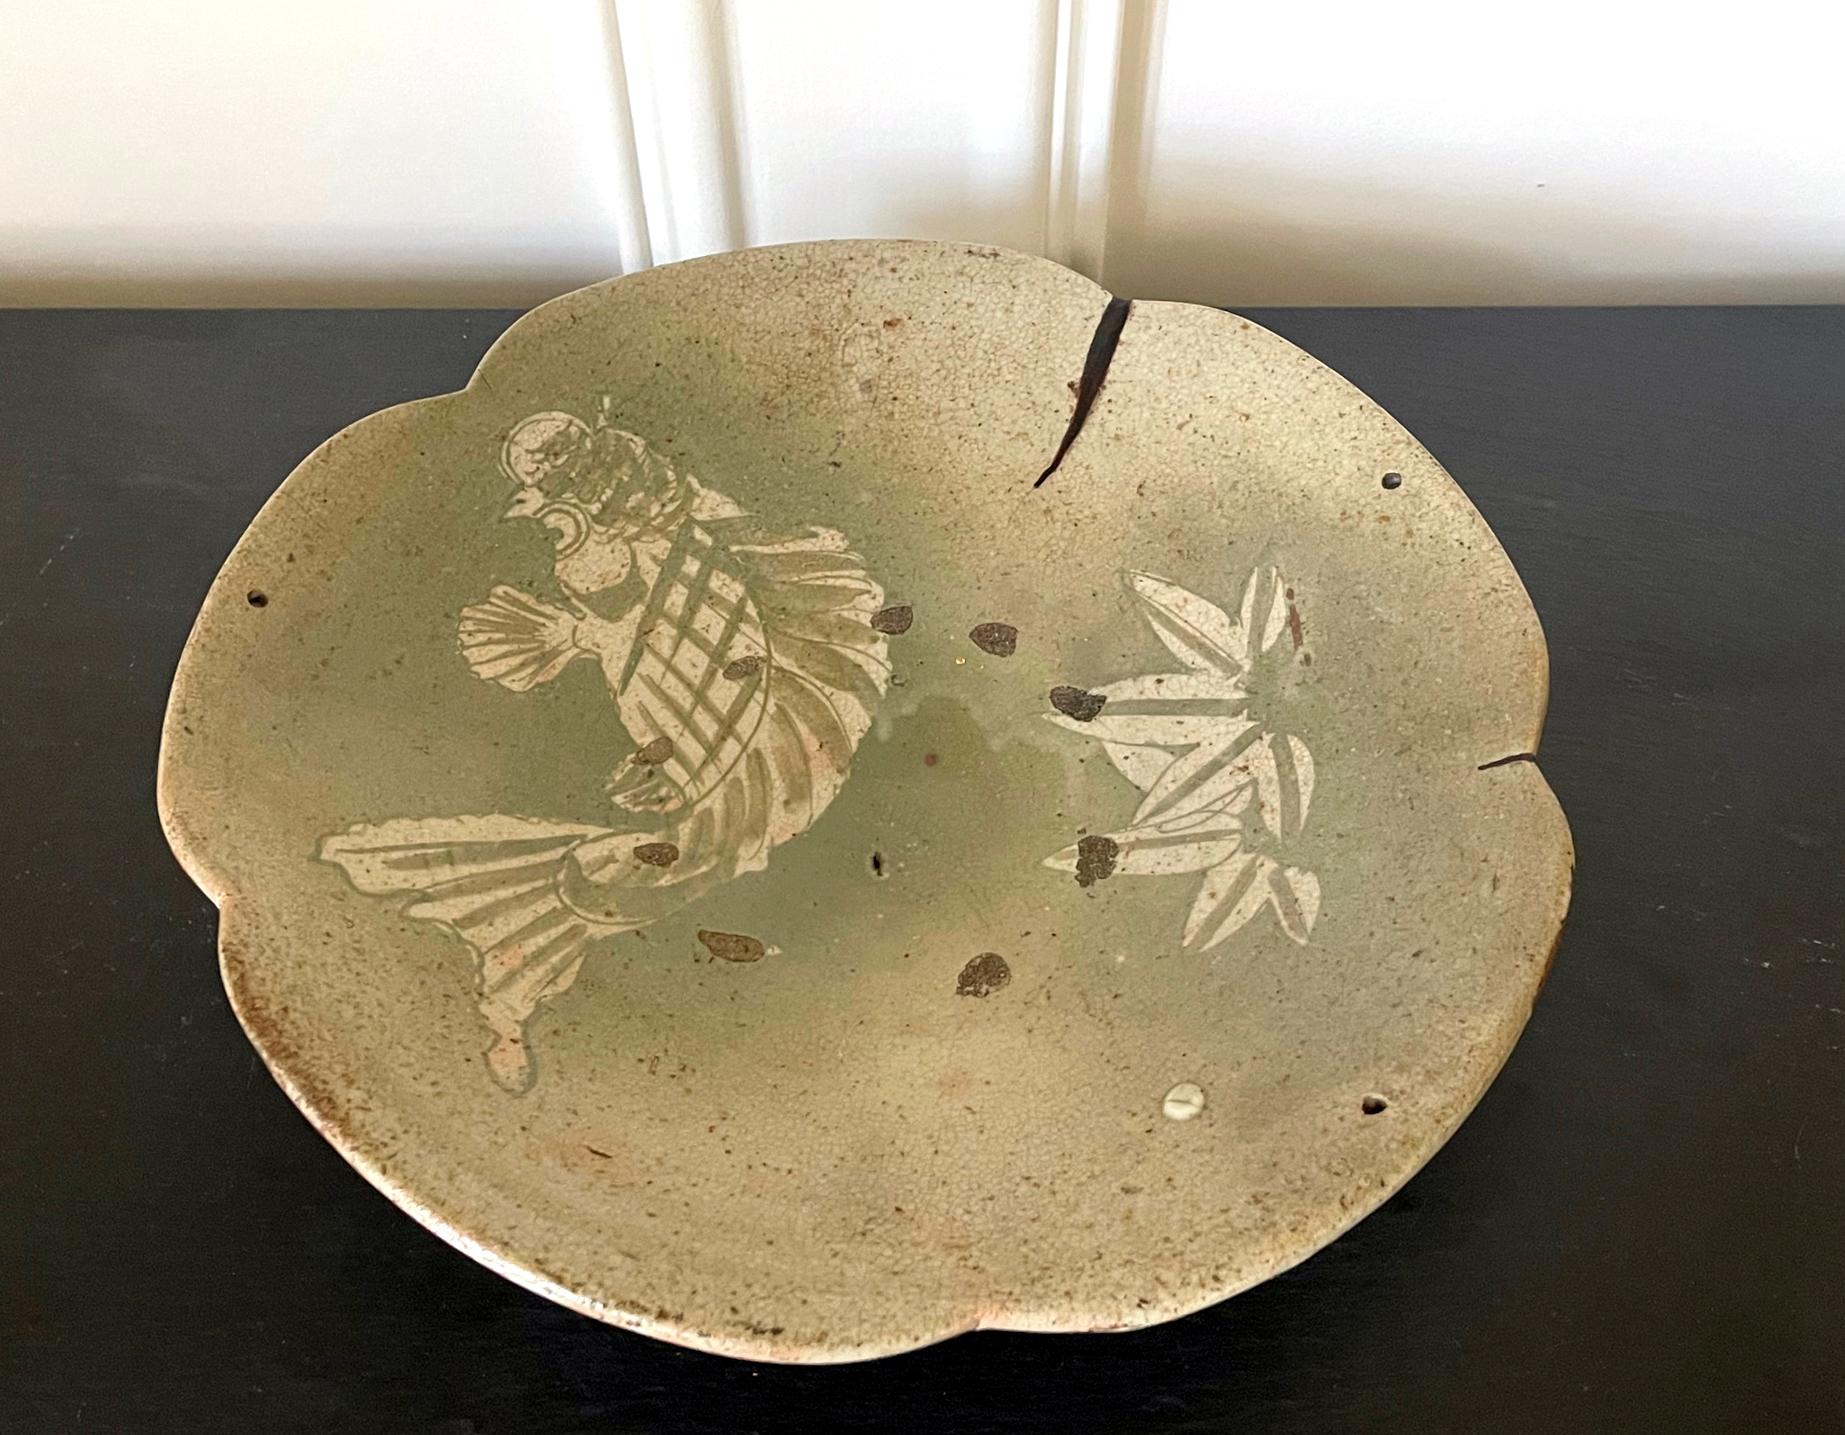 A glazed stoneware Ishizara (food serving platter) from Seto kilns. The platter features an unusual lobed edge and a slight irregular form from hand made. On the plate, a carp and a bamboo branch were highlighted in a green-celadon glaze, with an